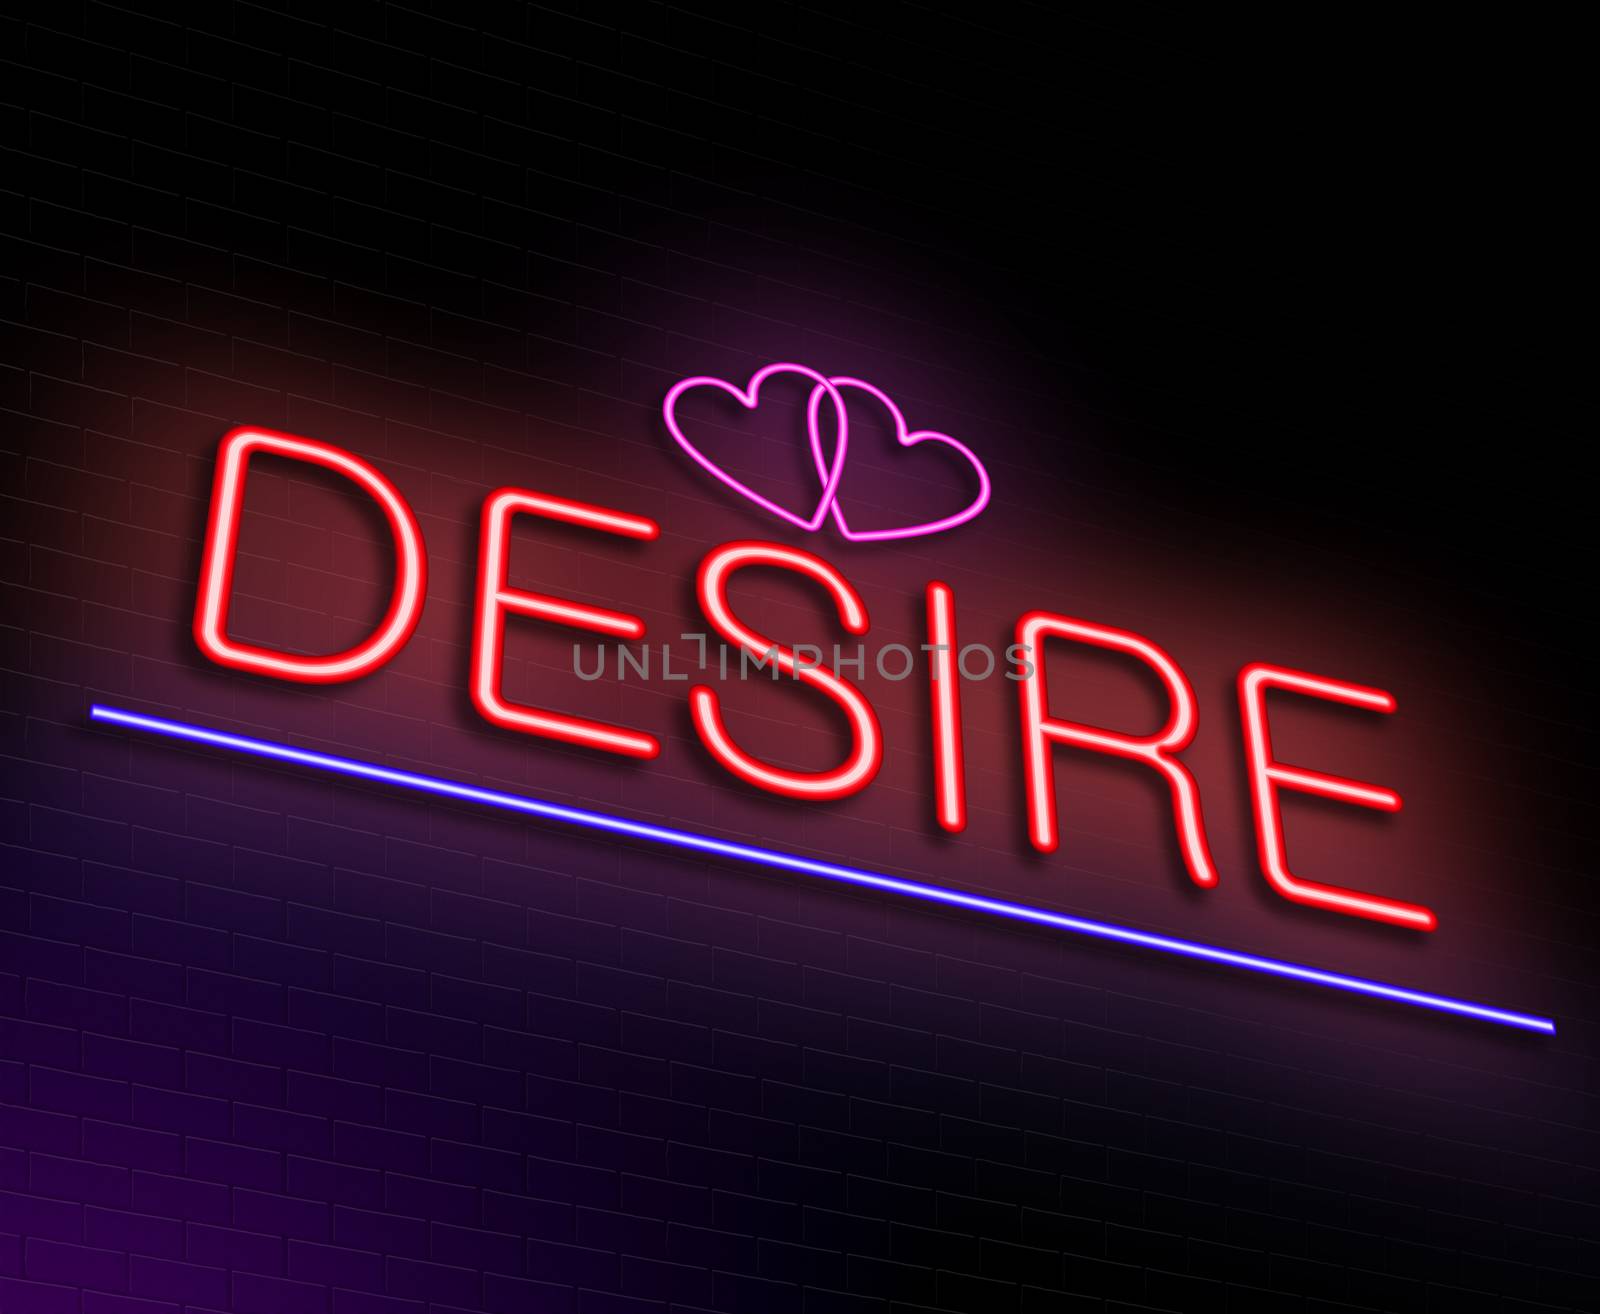 Design neon sign concept. by 72soul